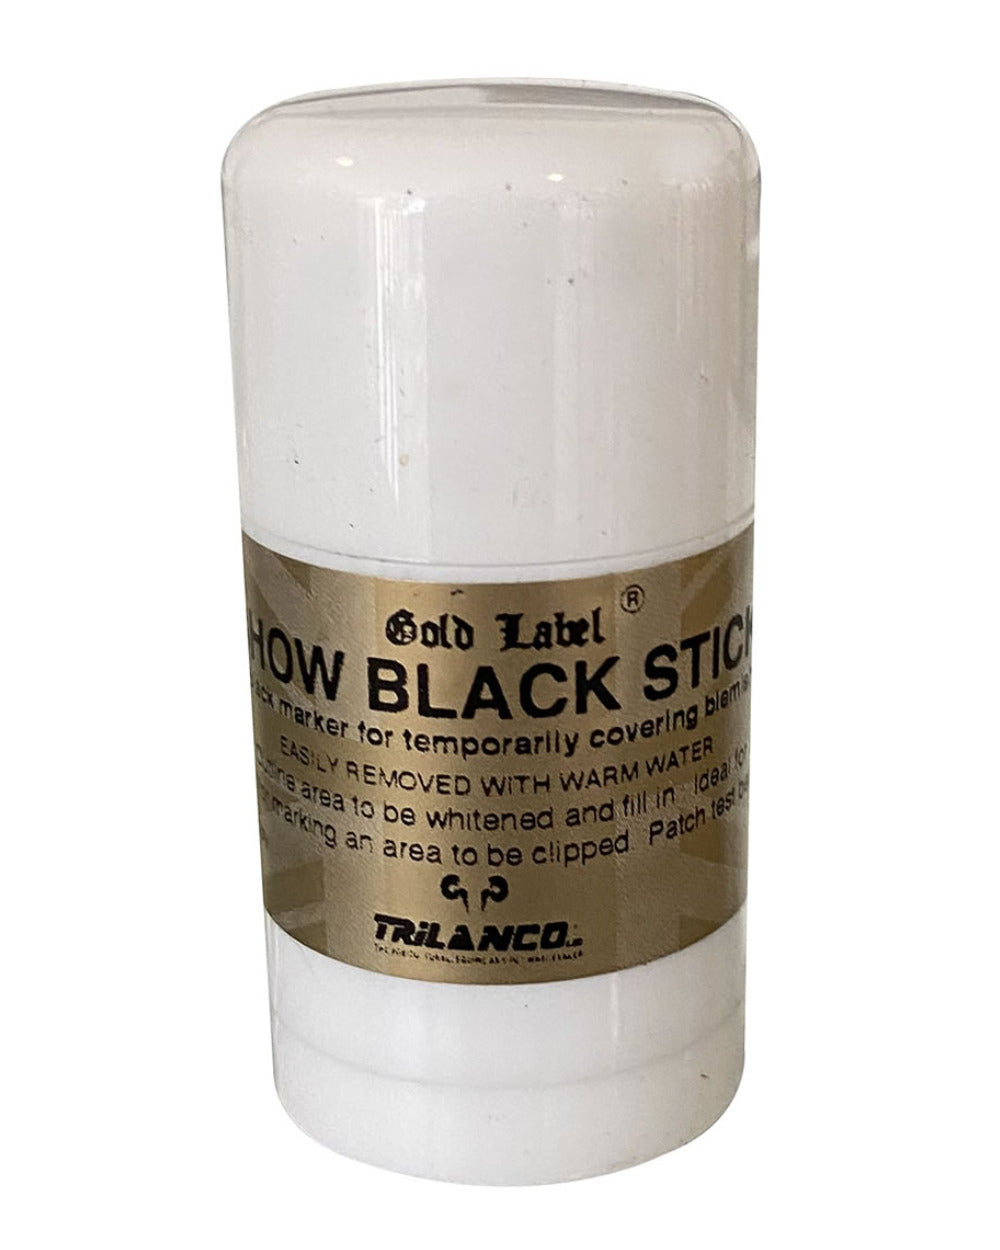 Gold Label Show Black Stick On A White Background